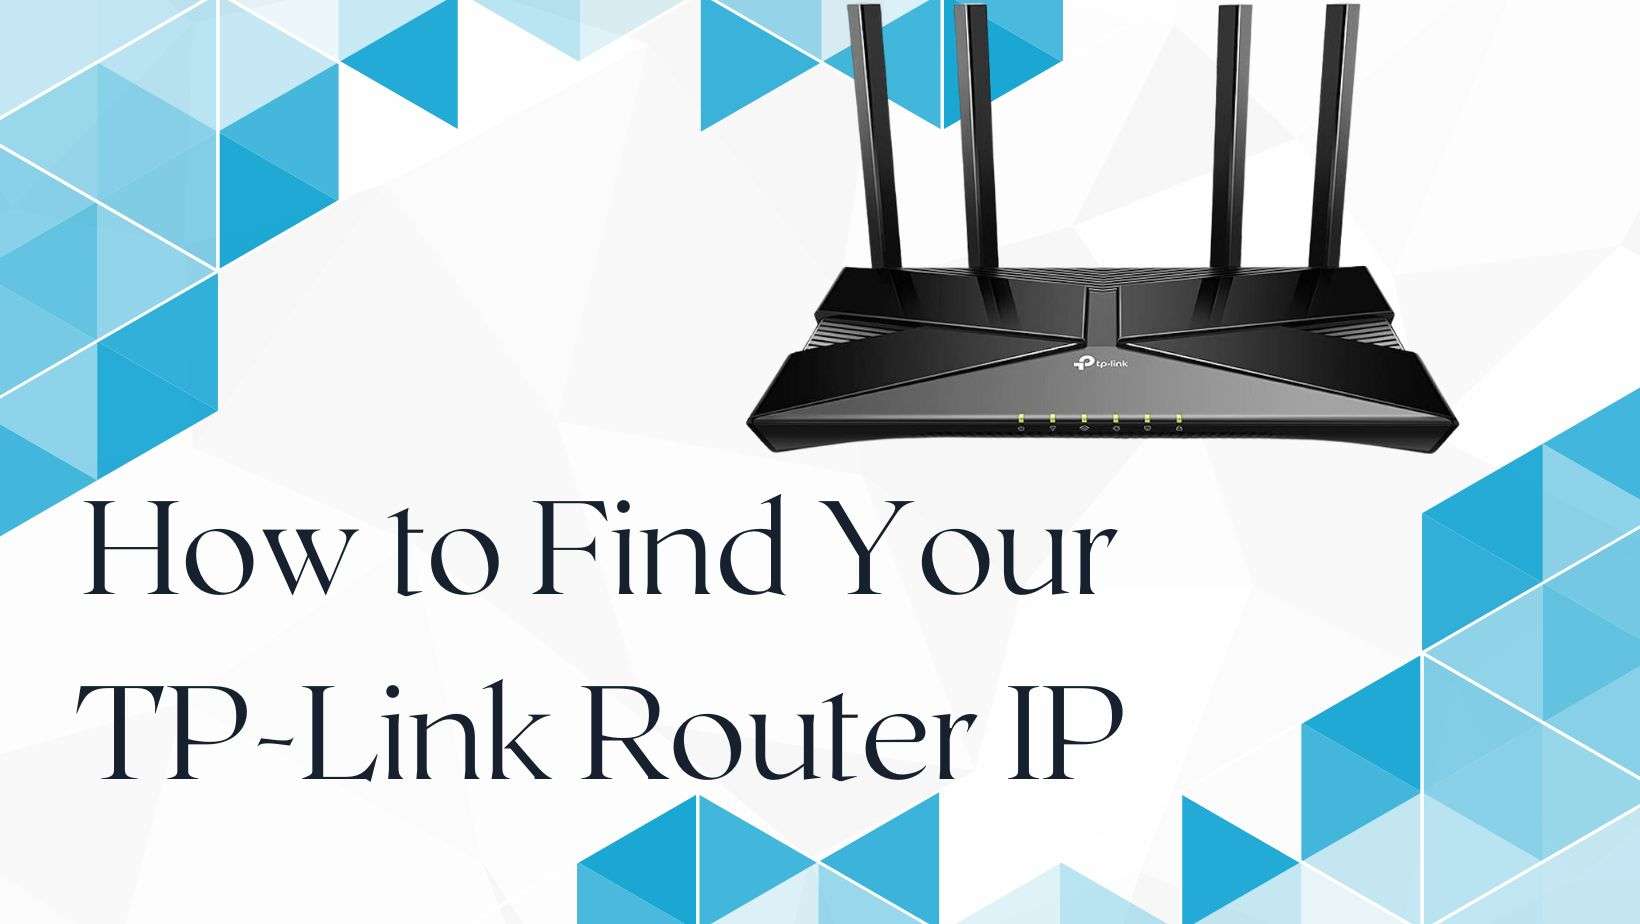 tp-link router IP